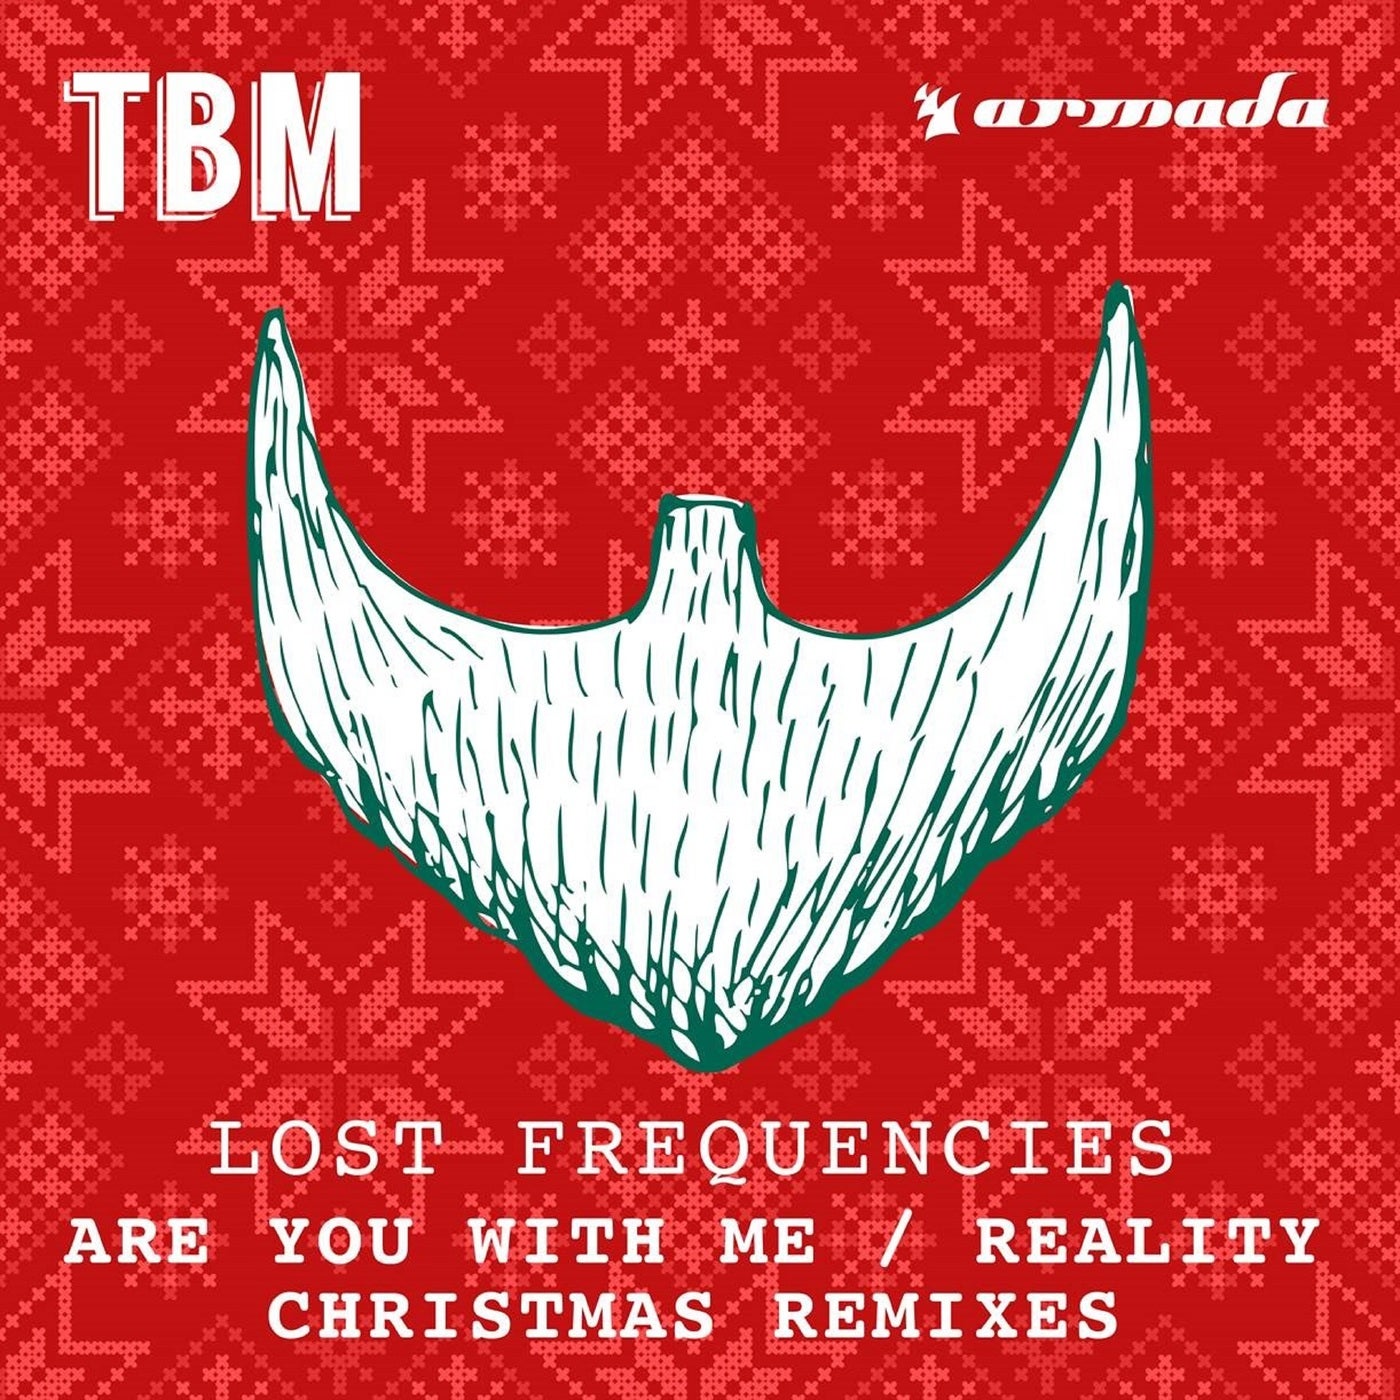 Are You With Me / Reality - Christmas Remixes